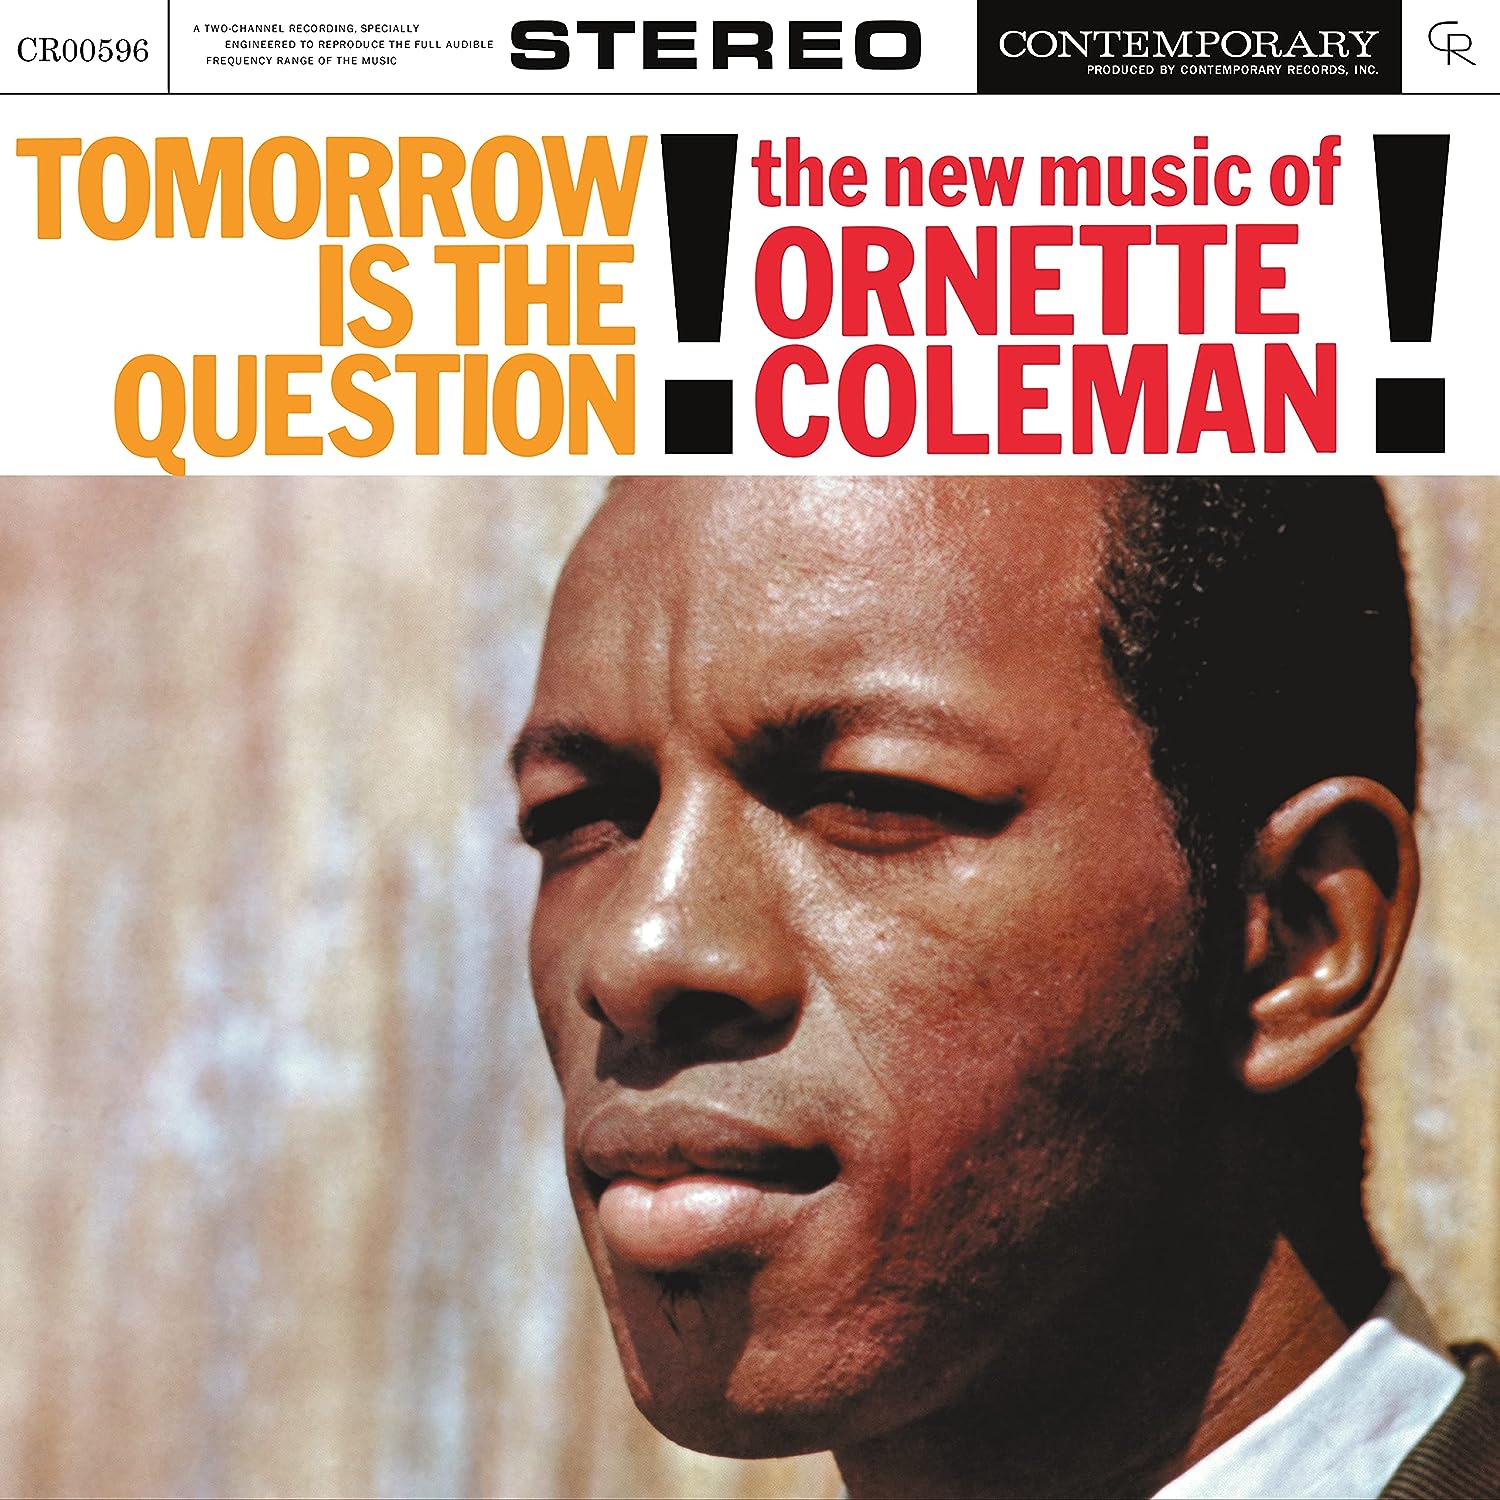 Джаз Universal (Aus) Ornette Coleman - Tomorrow Is The Question (Acoustic Sounds) (Black Vinyl LP) tomorrow x together 5 й мини альбом [the name chapter искушение]